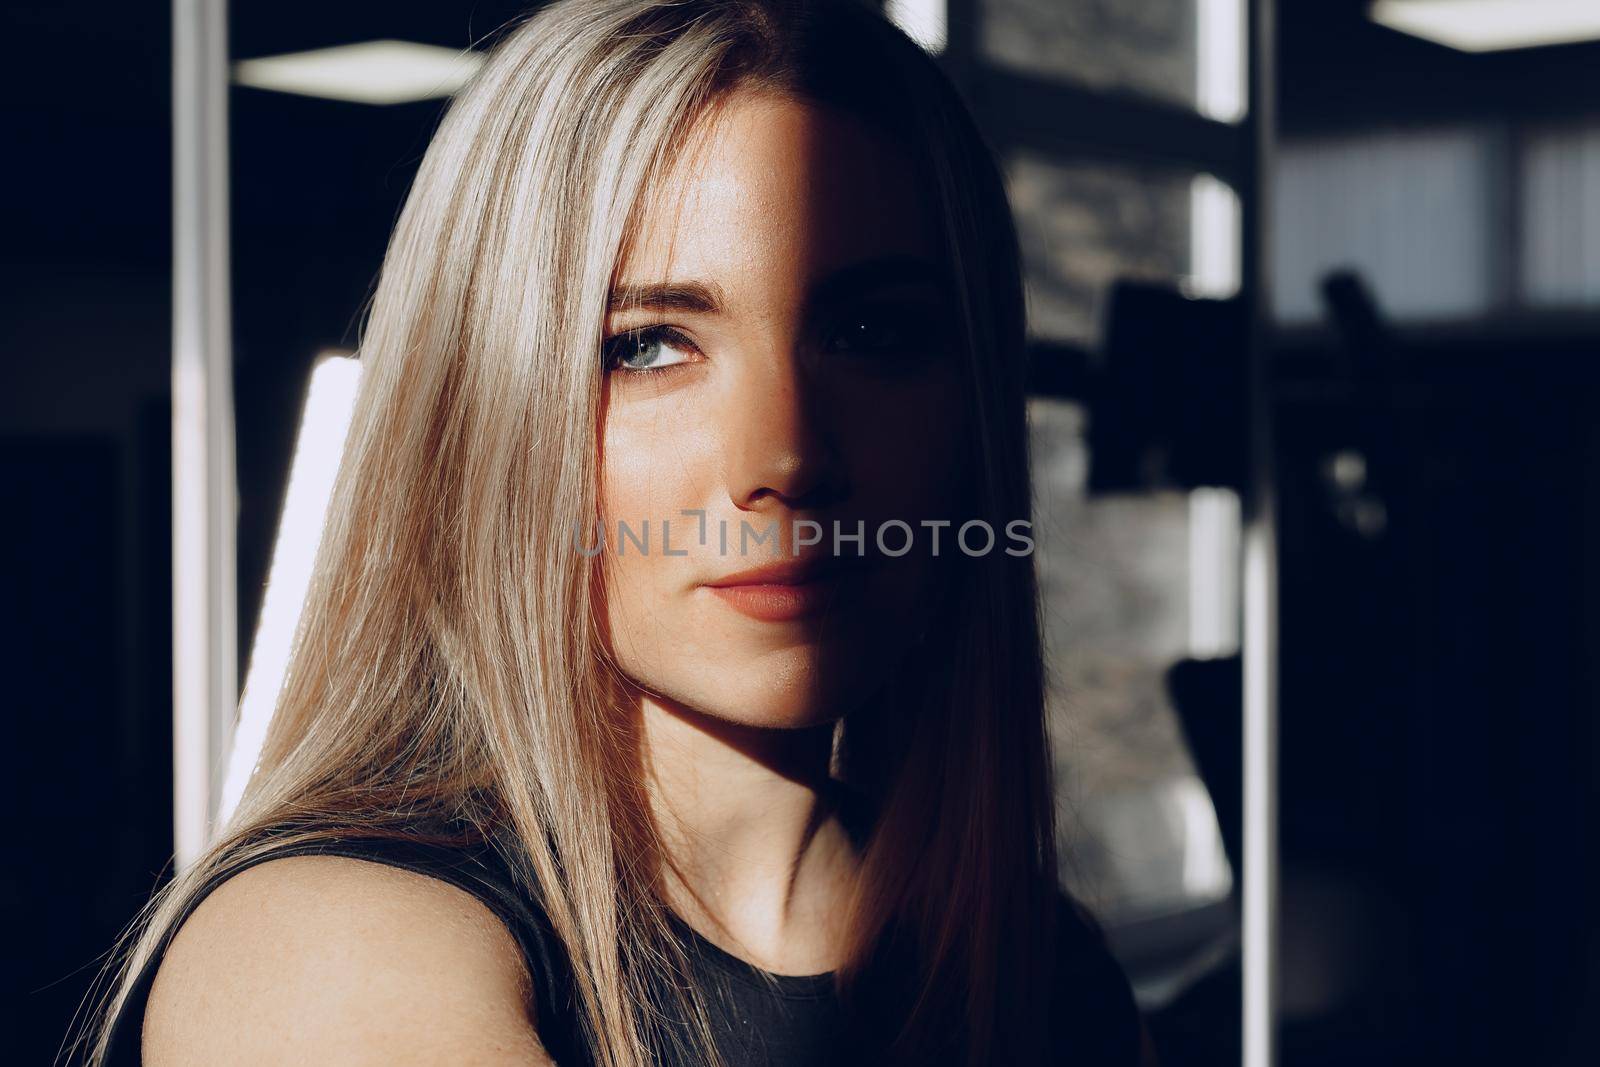 Close up portrait of a beautiful blonde woman with long hair smiling in dark room